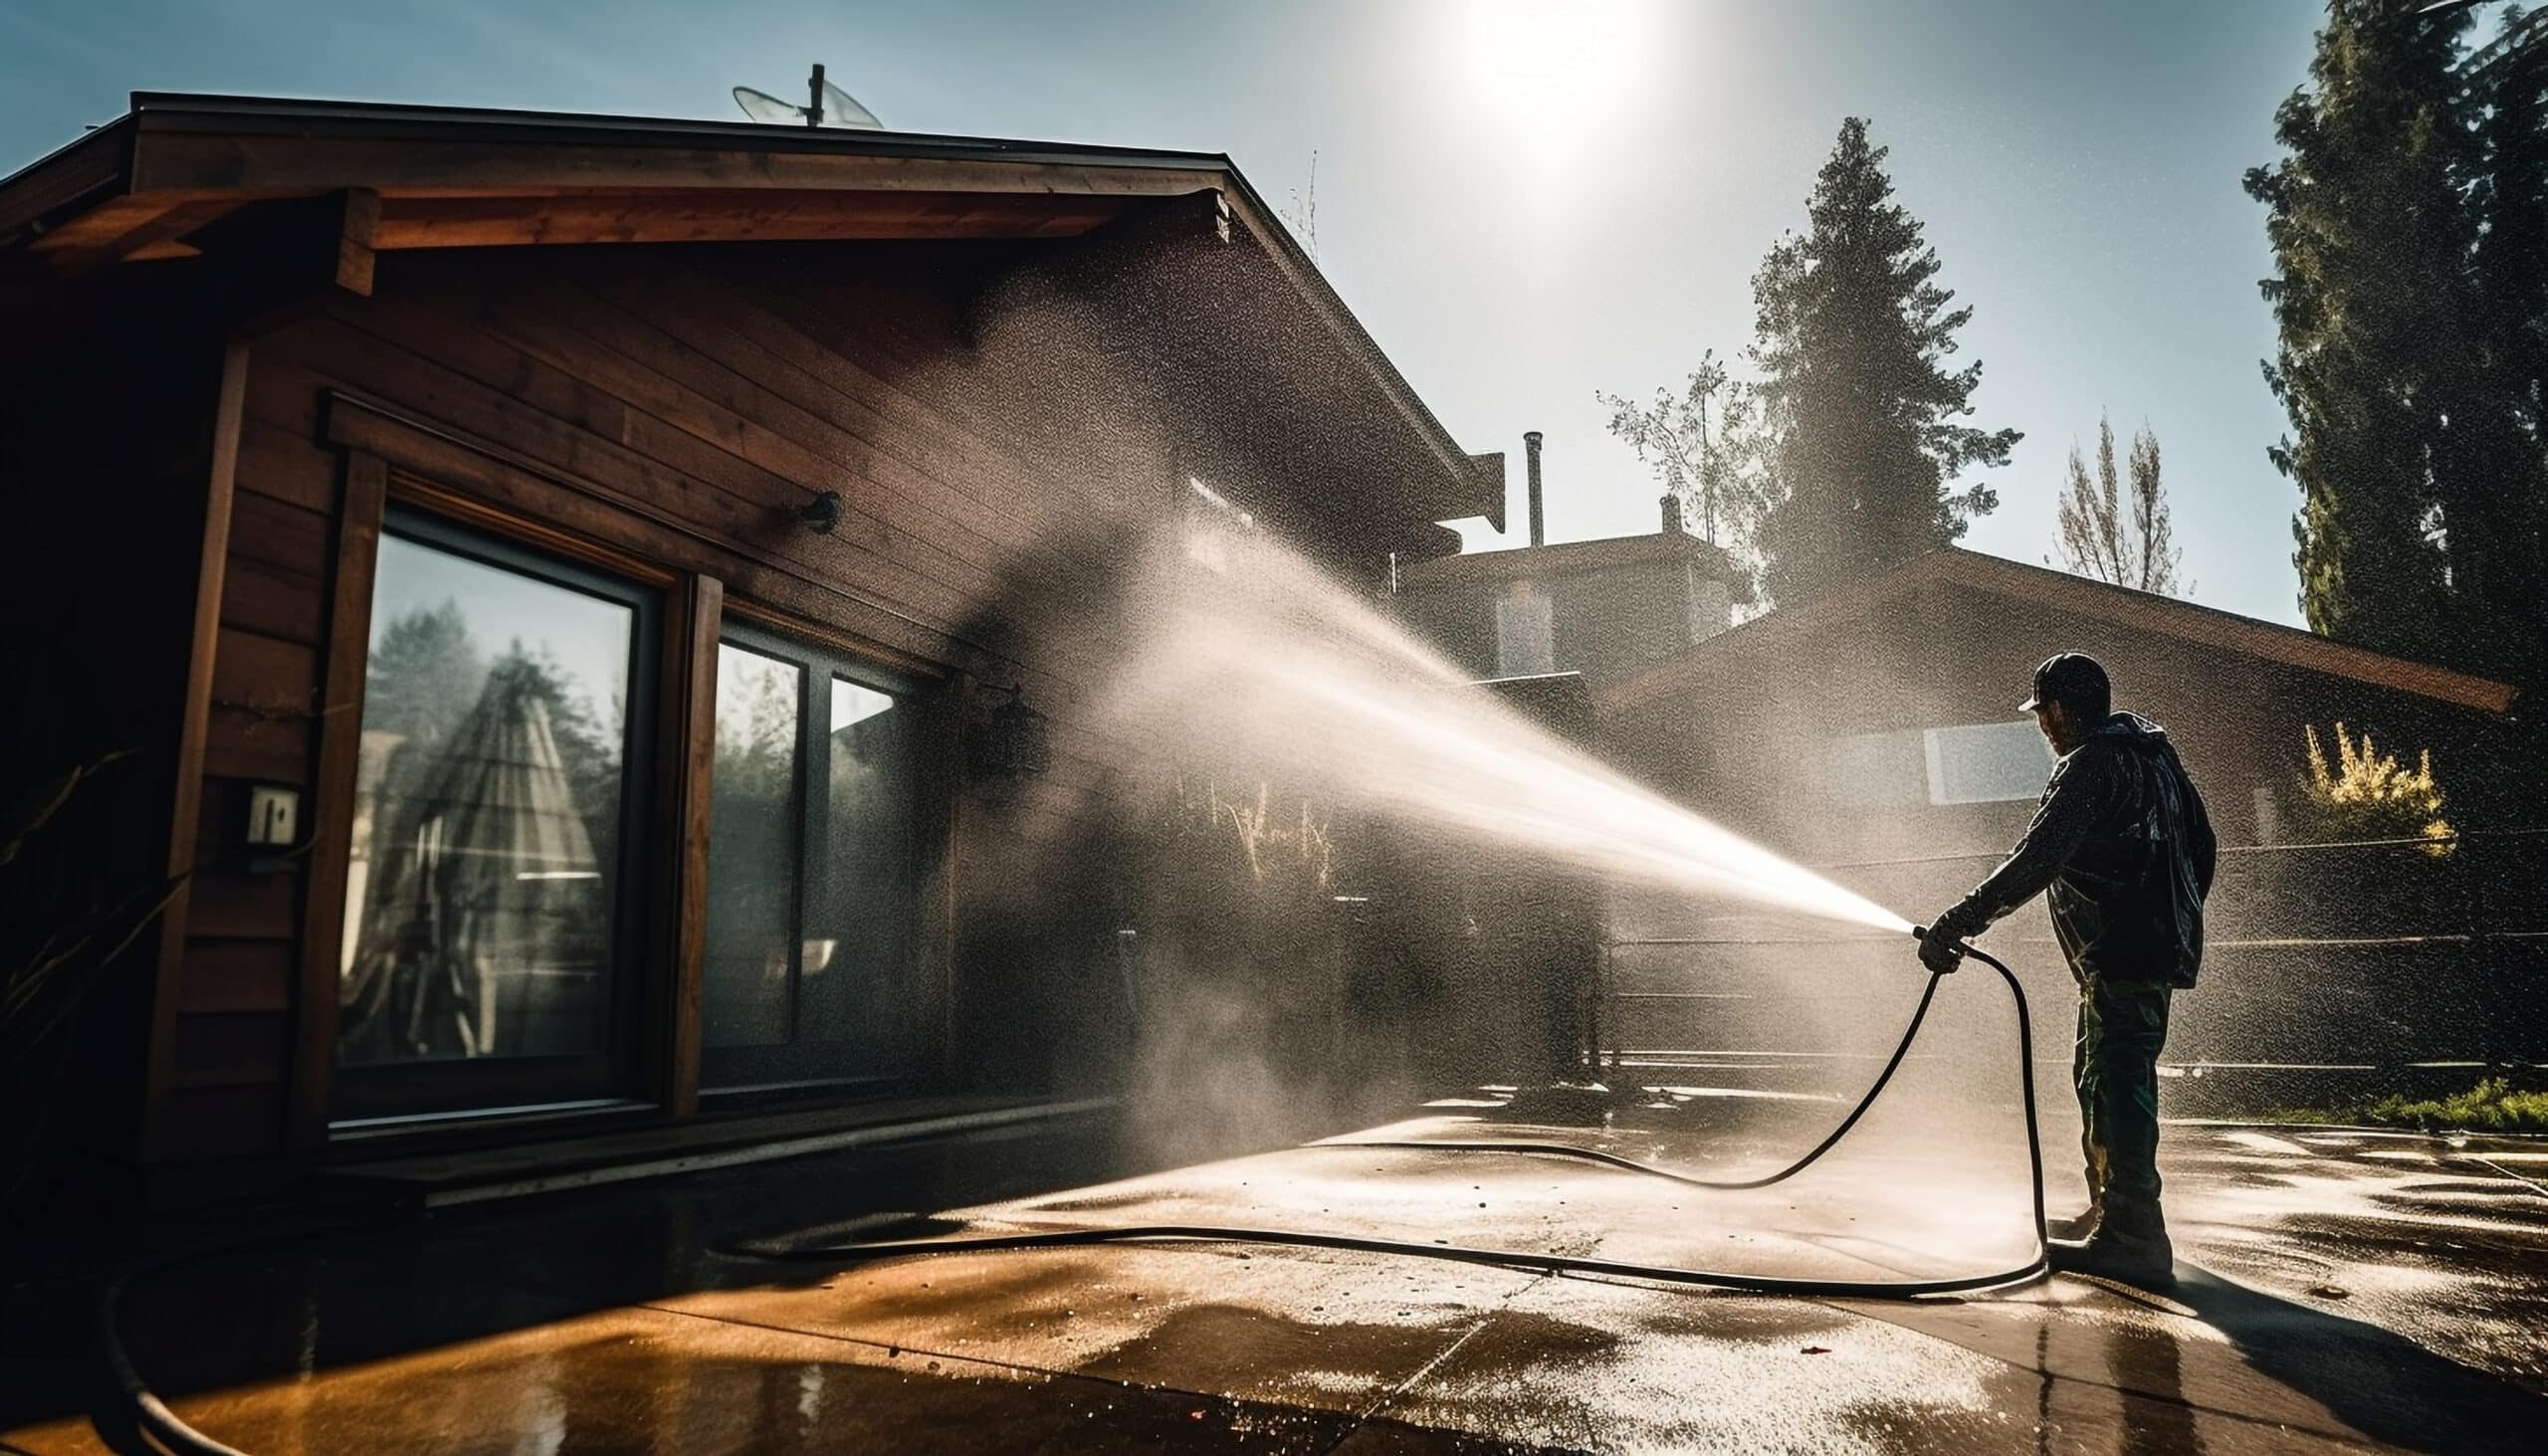 www.appr.com : How do I clean my driveway with an electric pressure washer?